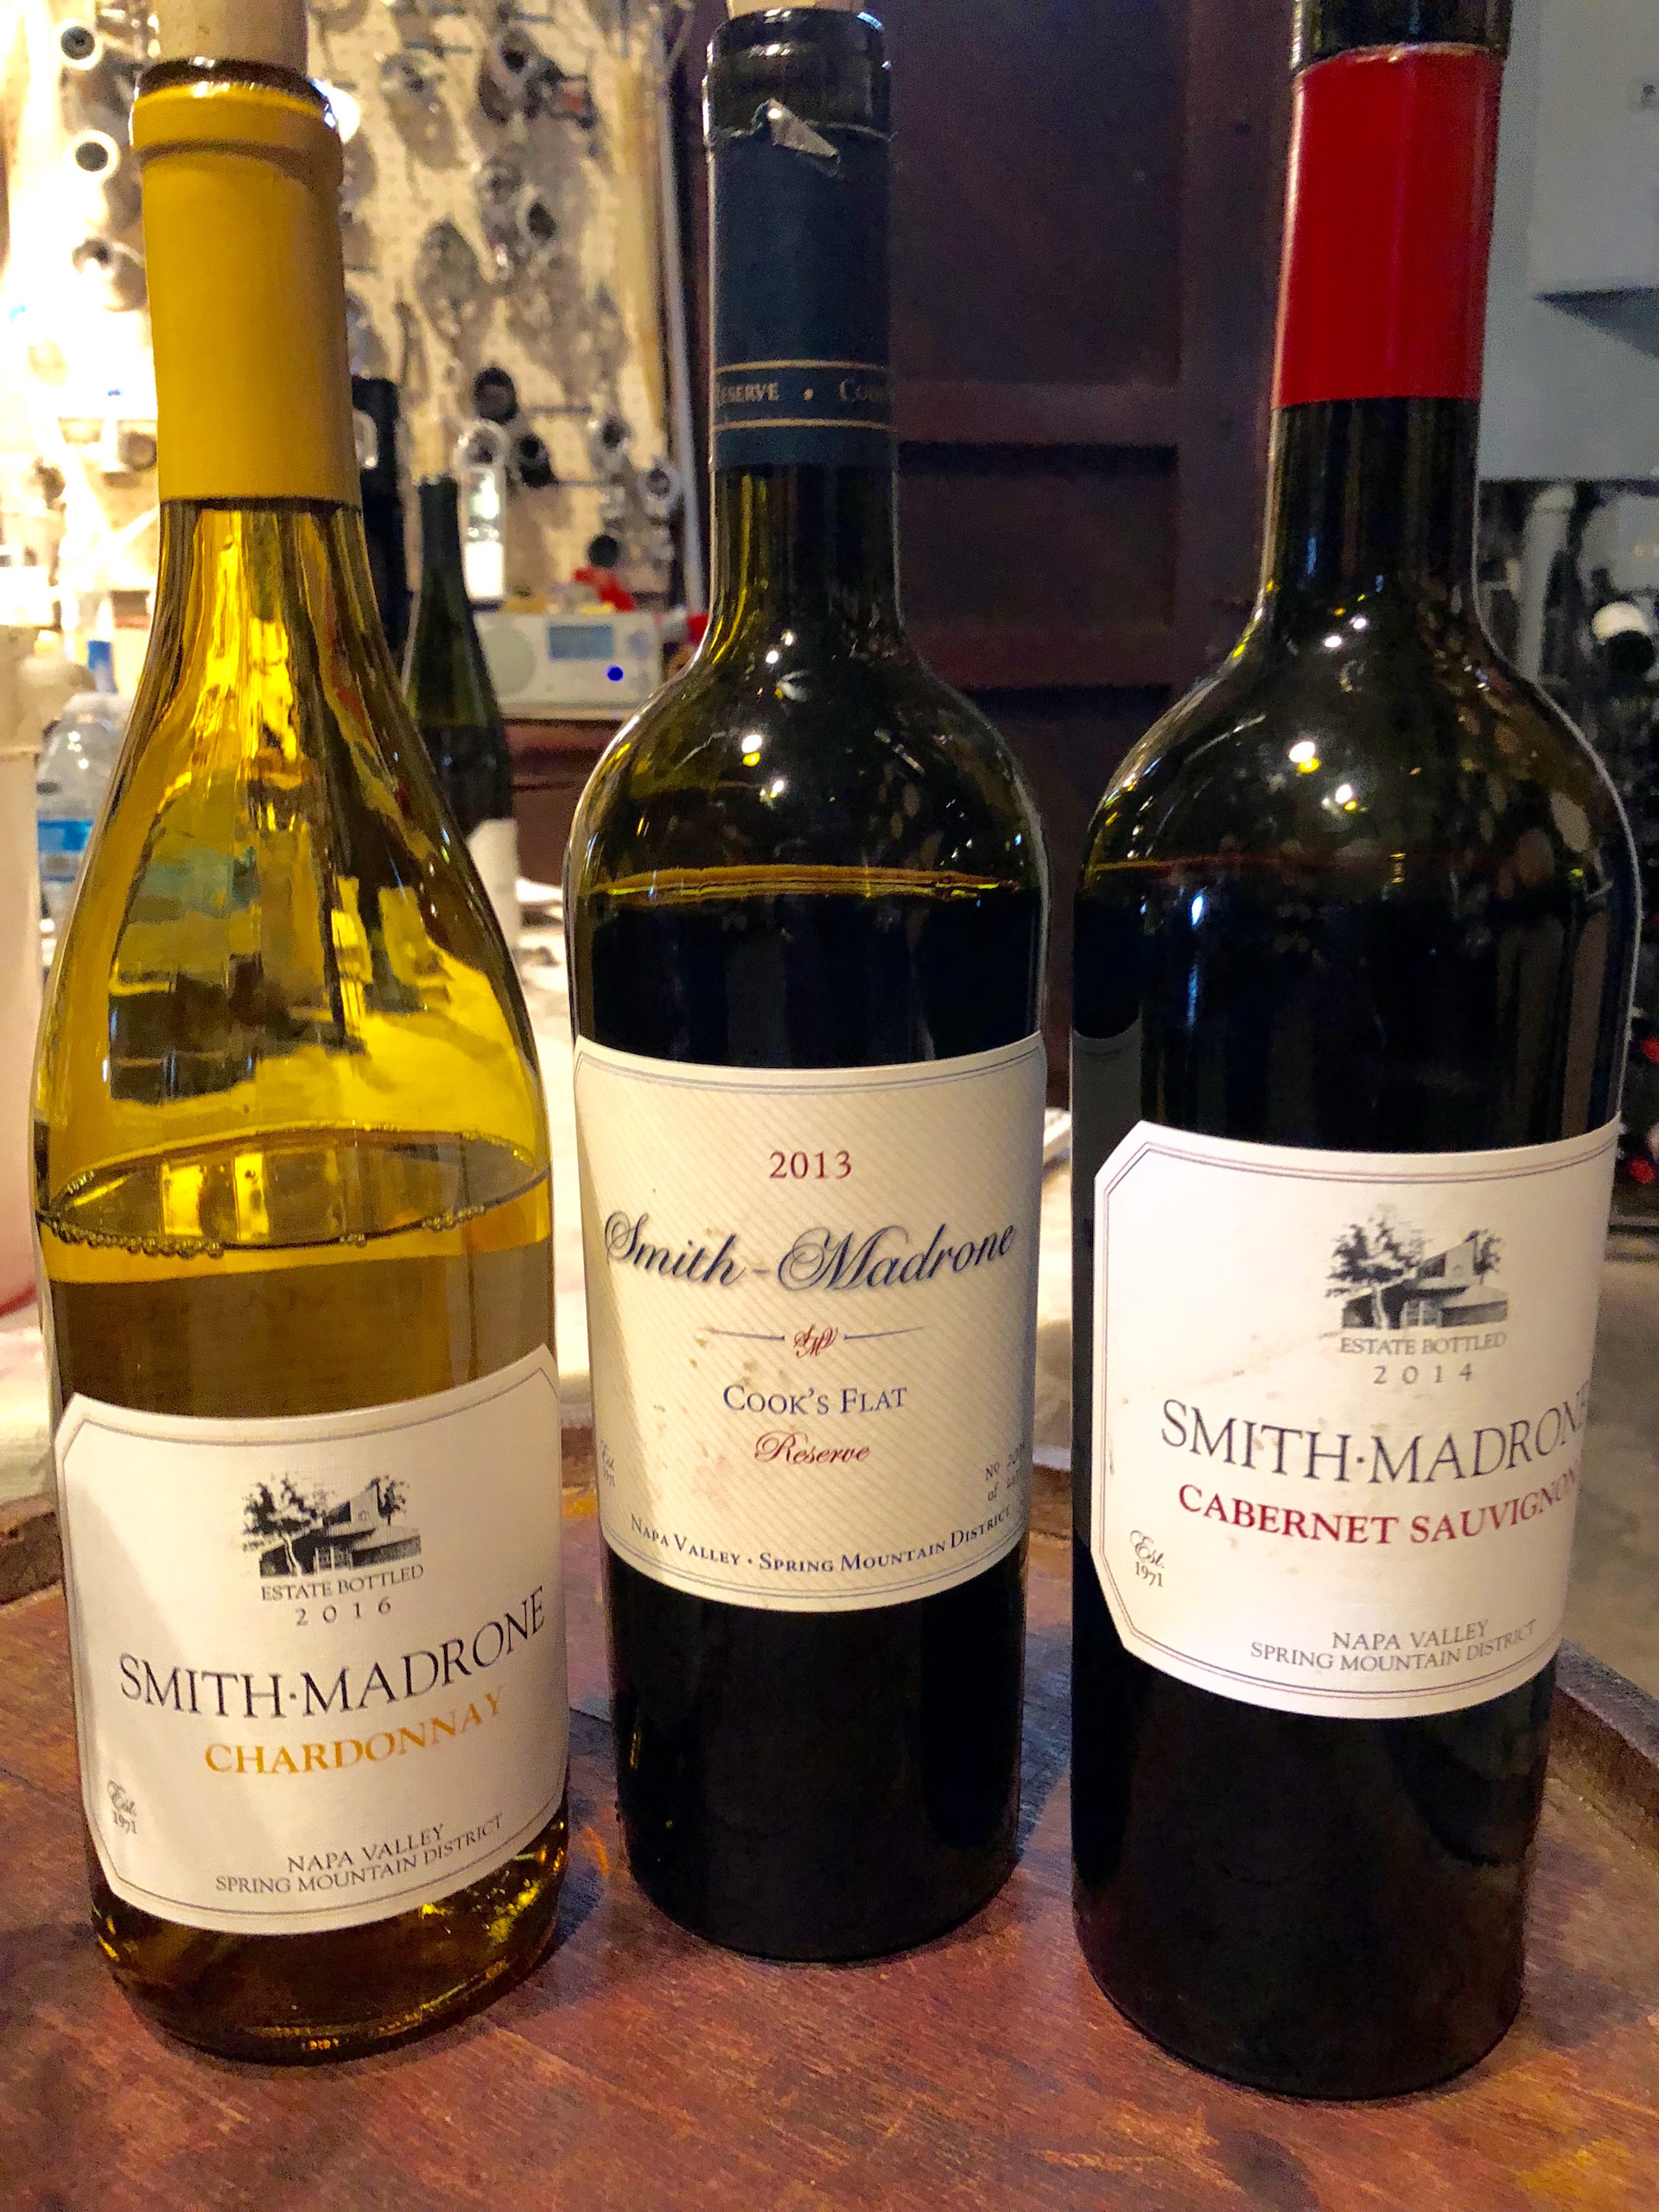 Some of Smith-Madrone’s exceptional wines including a 2016 Chardonnay, 2013 Cook’s Flat Reserve and 2014 Cabernet Sauvignon